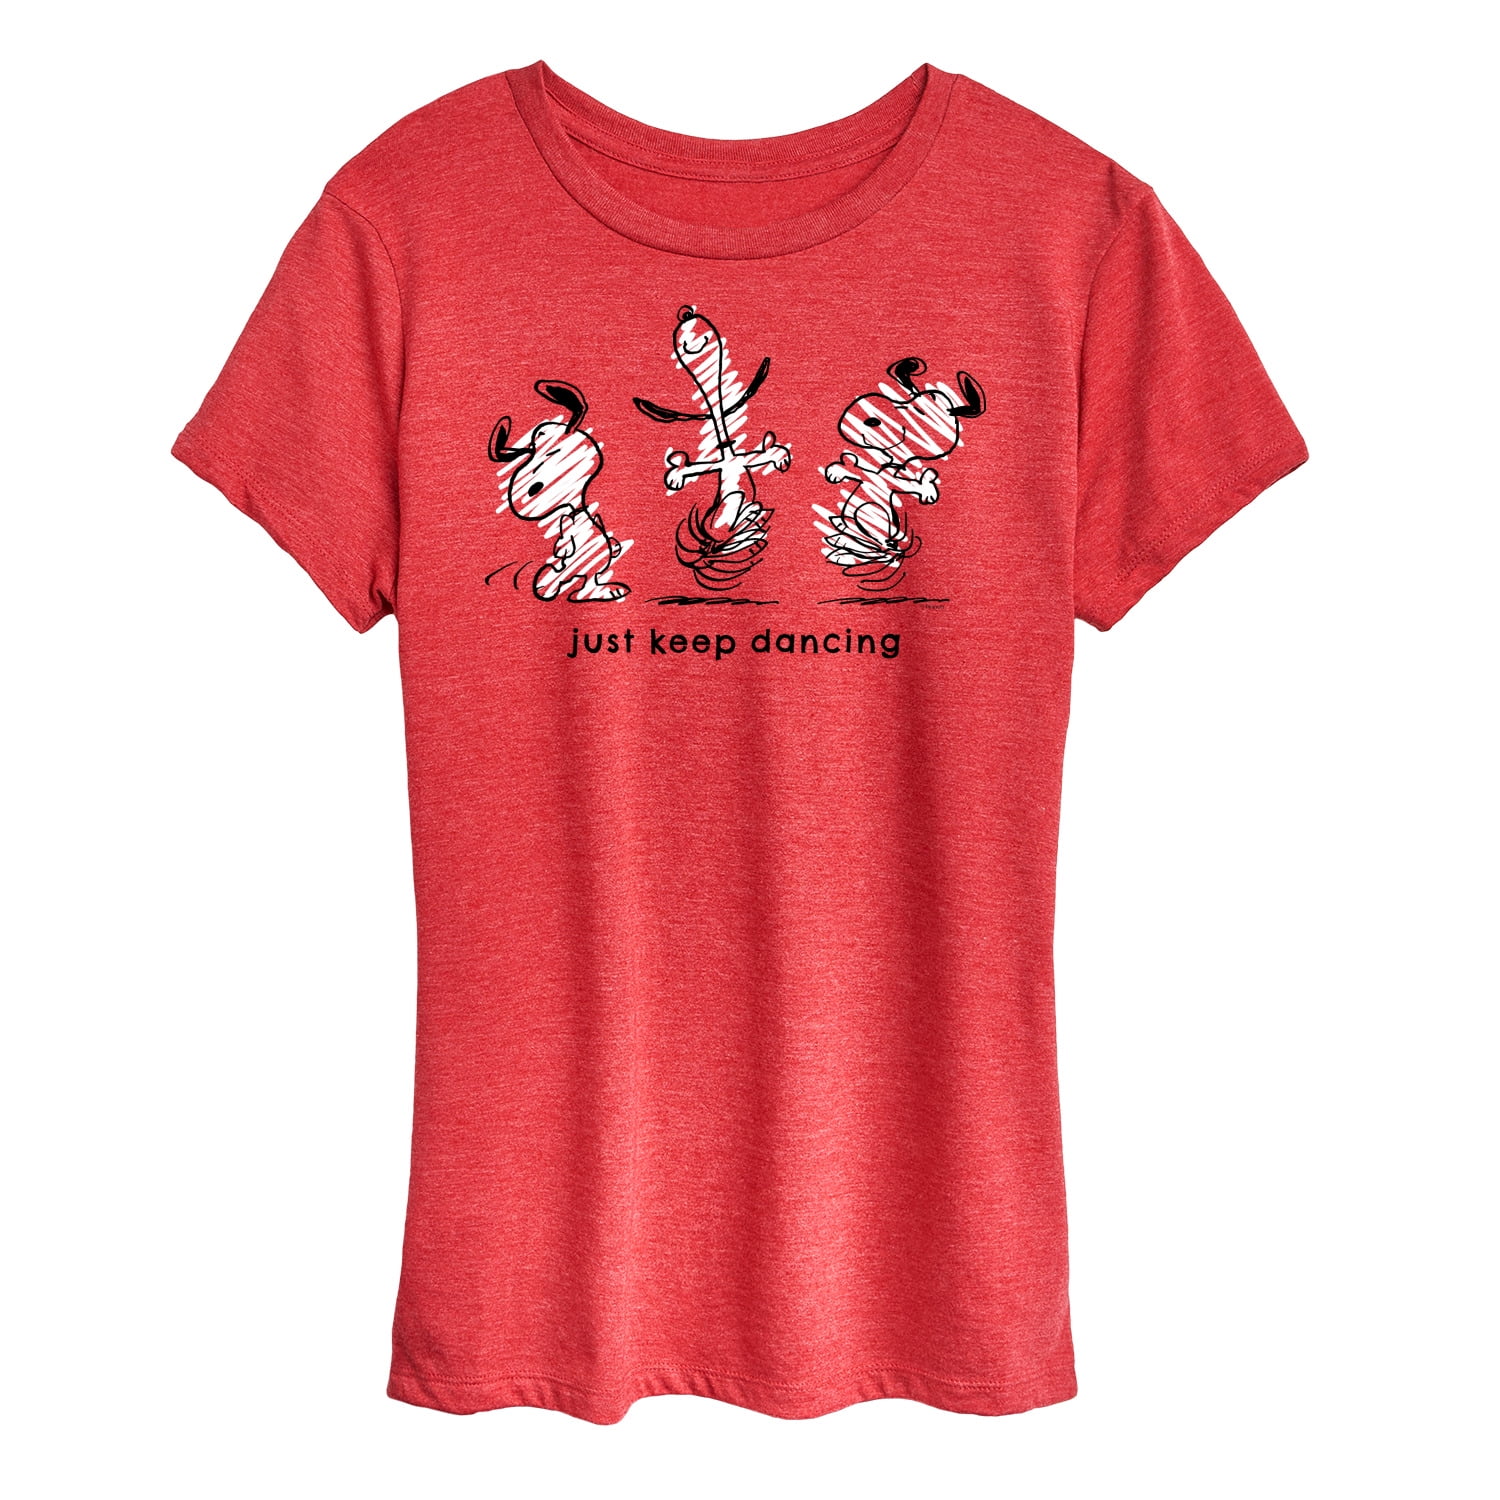 Peanuts - Snoopy Graphic Keep Short Just T-Shirt Women\'s Sleeve - Dancing